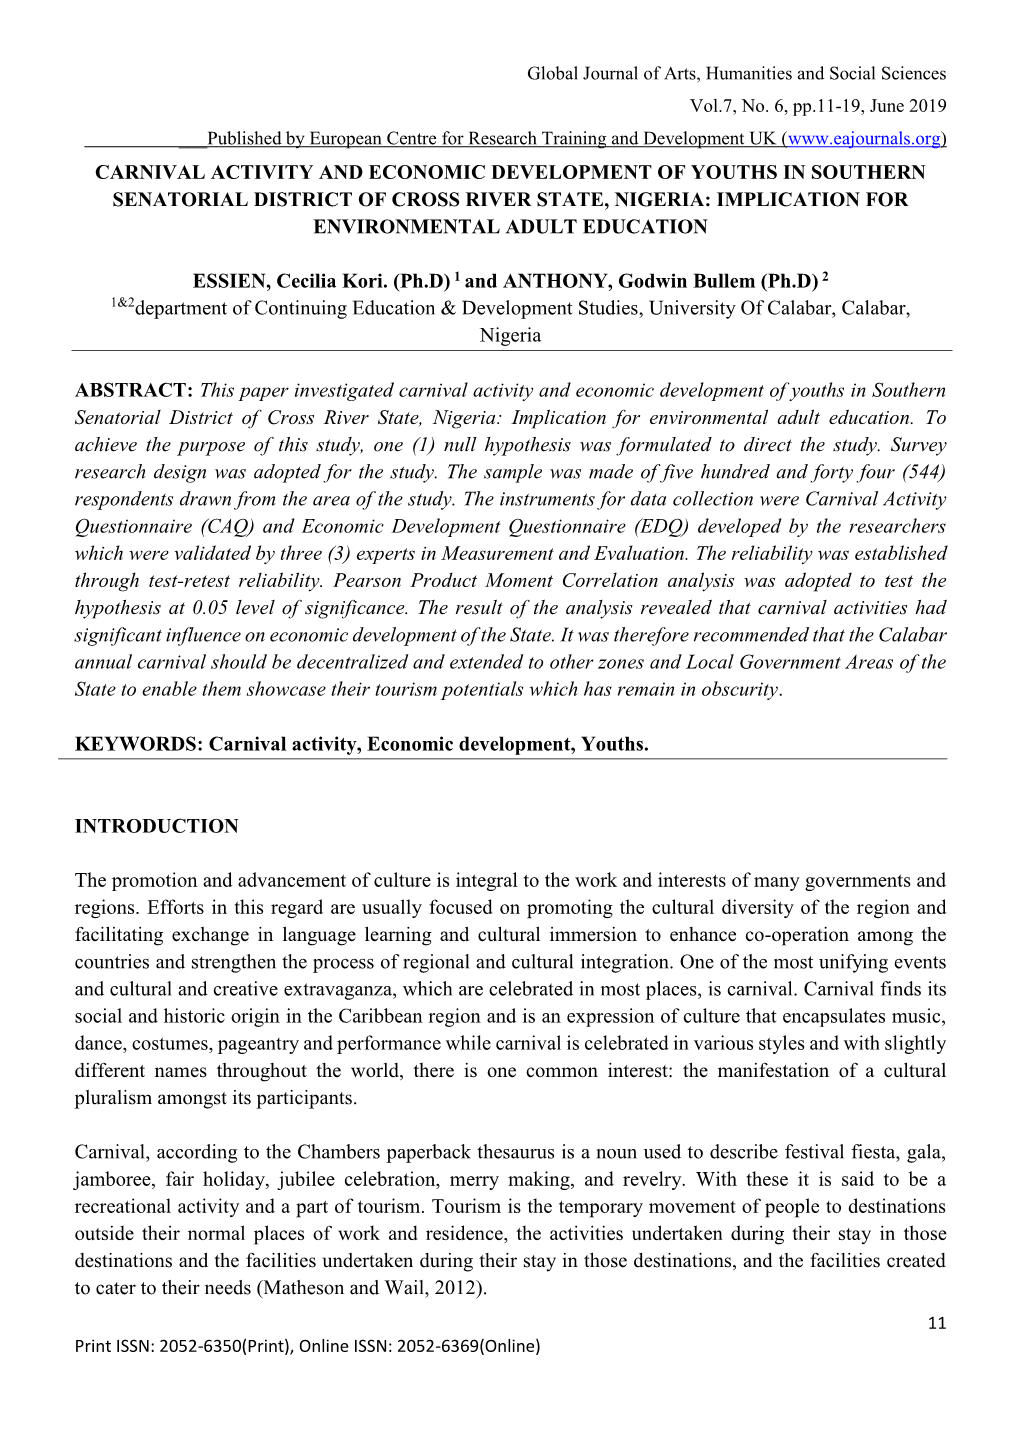 Carnival Activity and Economic Development of Youths in Southern Senatorial District of Cross River State, Nigeria: Implication for Environmental Adult Education